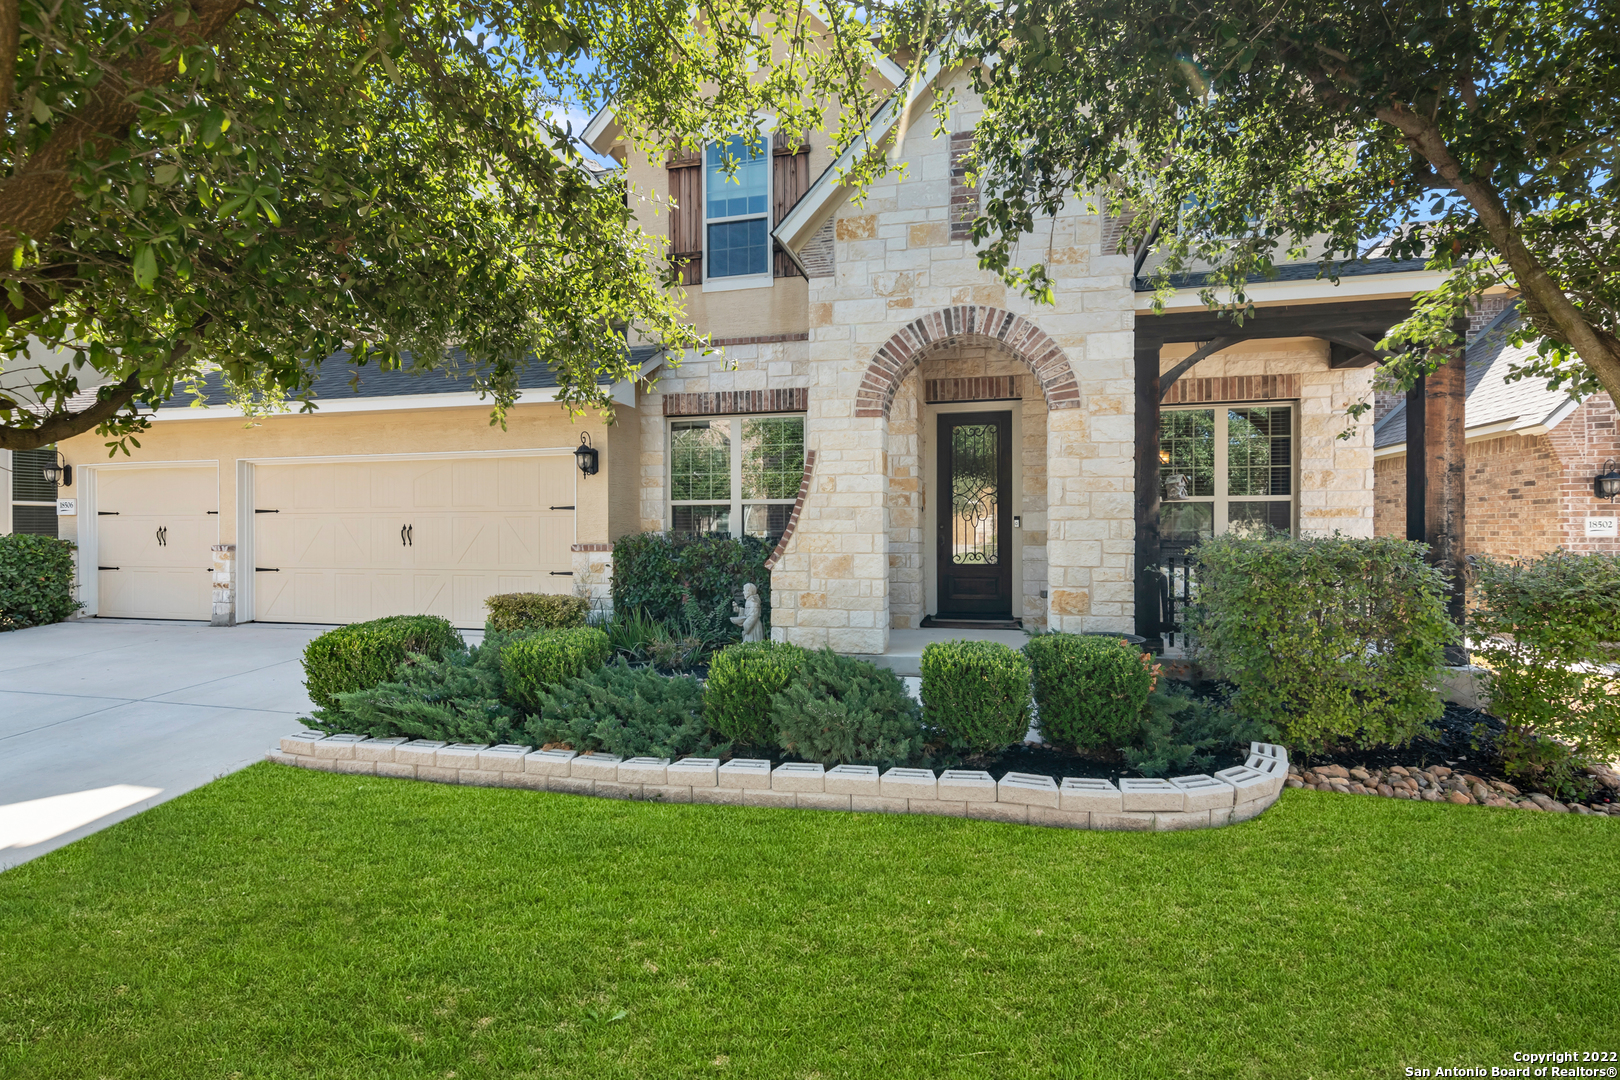 This spacious David Weekly home is located on a beautiful greenbelt lot in Rogers Ranch. As you step inside, the open floor plan makes it easy to picture entertaining at any level. Timeless details include travertine floors, high ceilings, a neutral color palette, thoughtfully placed windows, and a private study with hardwood floors off the entry. Formal and casual dining areas add flexibility to the floor plan, both flowing seamlessly into the spacious family room with stone fireplace. Just past, the gourmet kitchen features white cabinetry, bold granite counters, stainless steel appliances, and gas cooking. A wonderful mudroom is just off the laundry room. Relax and unwind in the downstairs primary suite which provides an en suite with a walk-in closet, soaking tub, standalone shower, plus dual vanity.     Upstairs is a large game room, adjacent media room, and four generously sized secondary bedrooms, allowing tons of space to spread out or host guests. Outside, a three-car garage contributes additional value to the property. Celebrate summer barbecues or birthday parties in the tranquil back yard with great greenbelt views, showcasing a covered patio which includes a fireplace plus an outdoor kitchen with gas grill and fridge.  Enjoy the neighborhood swimming pool, hiking trails and sports courts that make Rogers Ranch such a wonderful place to live.